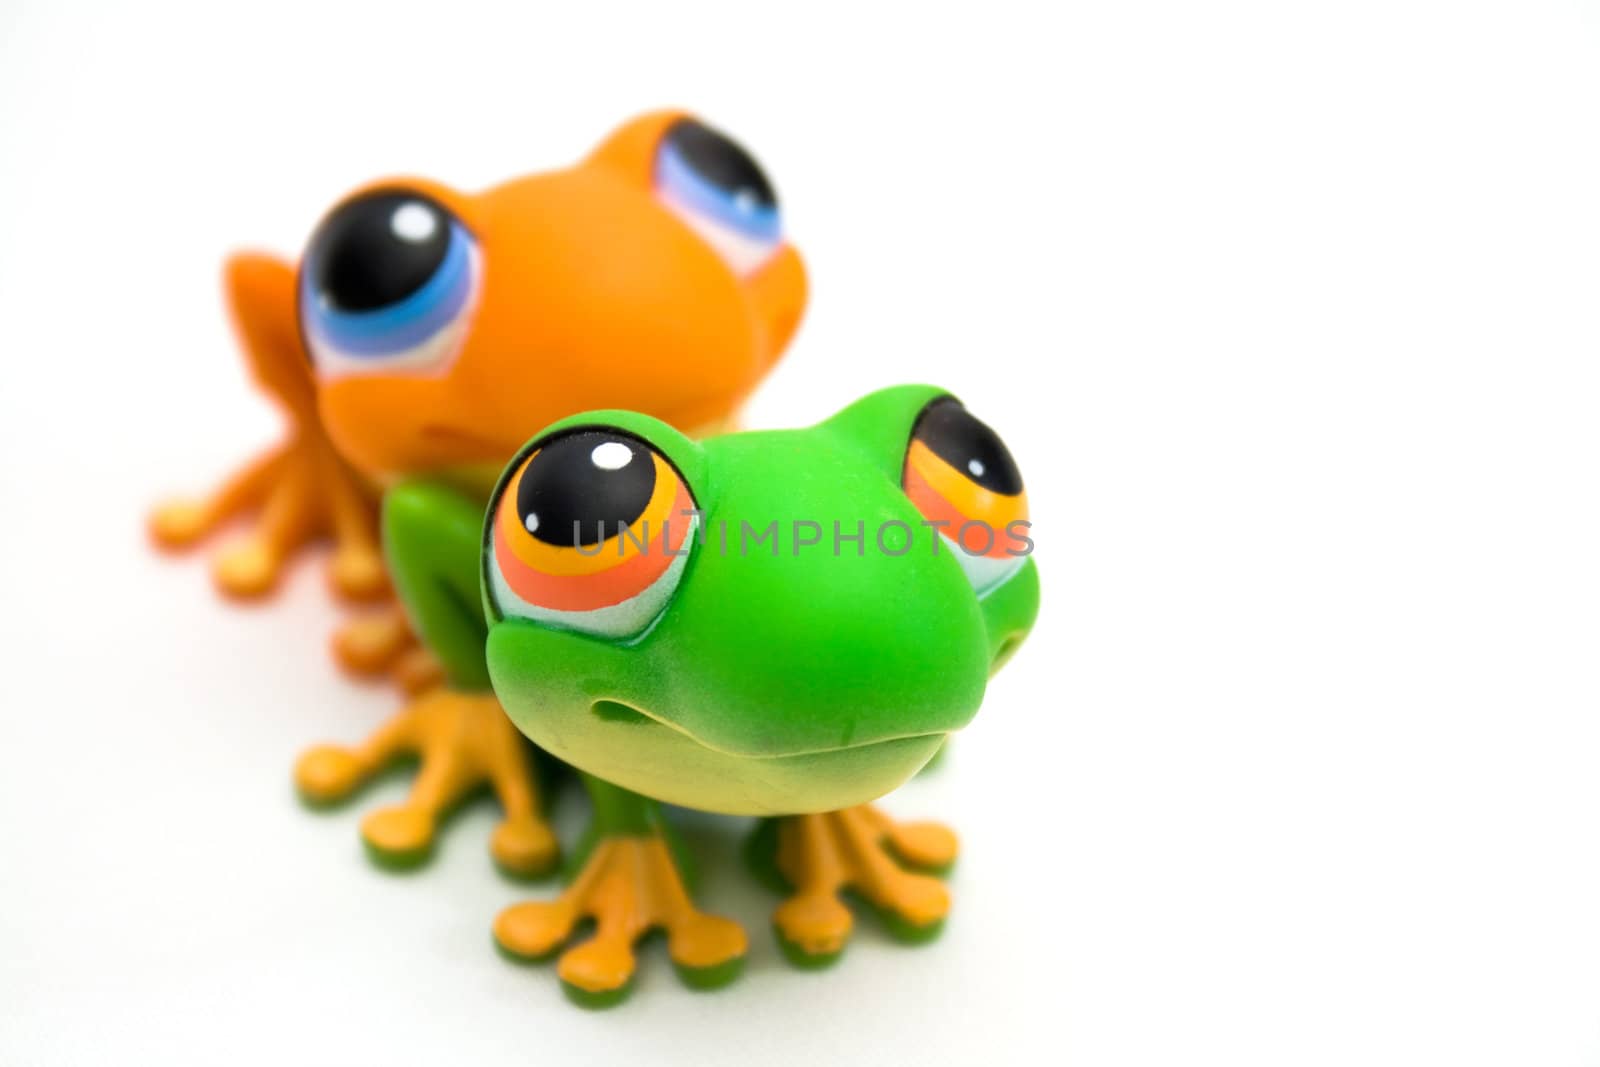 Two plastic frog toys, one orange and one green, isolated on white background.